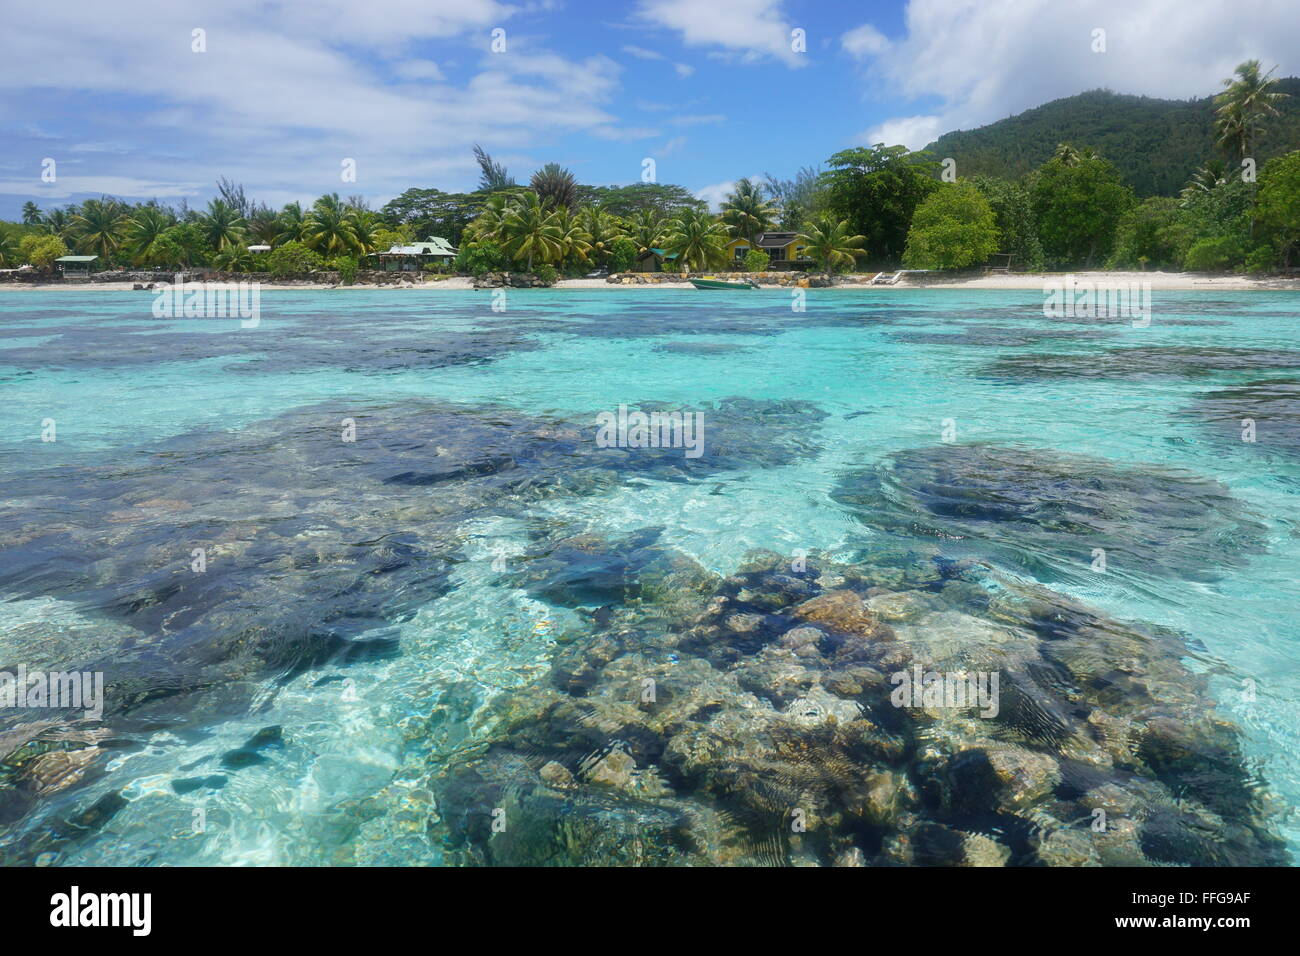 Corals in shallow water seen from above the surface with the shore in background, lagoon of Huahine island, French polynesia Stock Photo